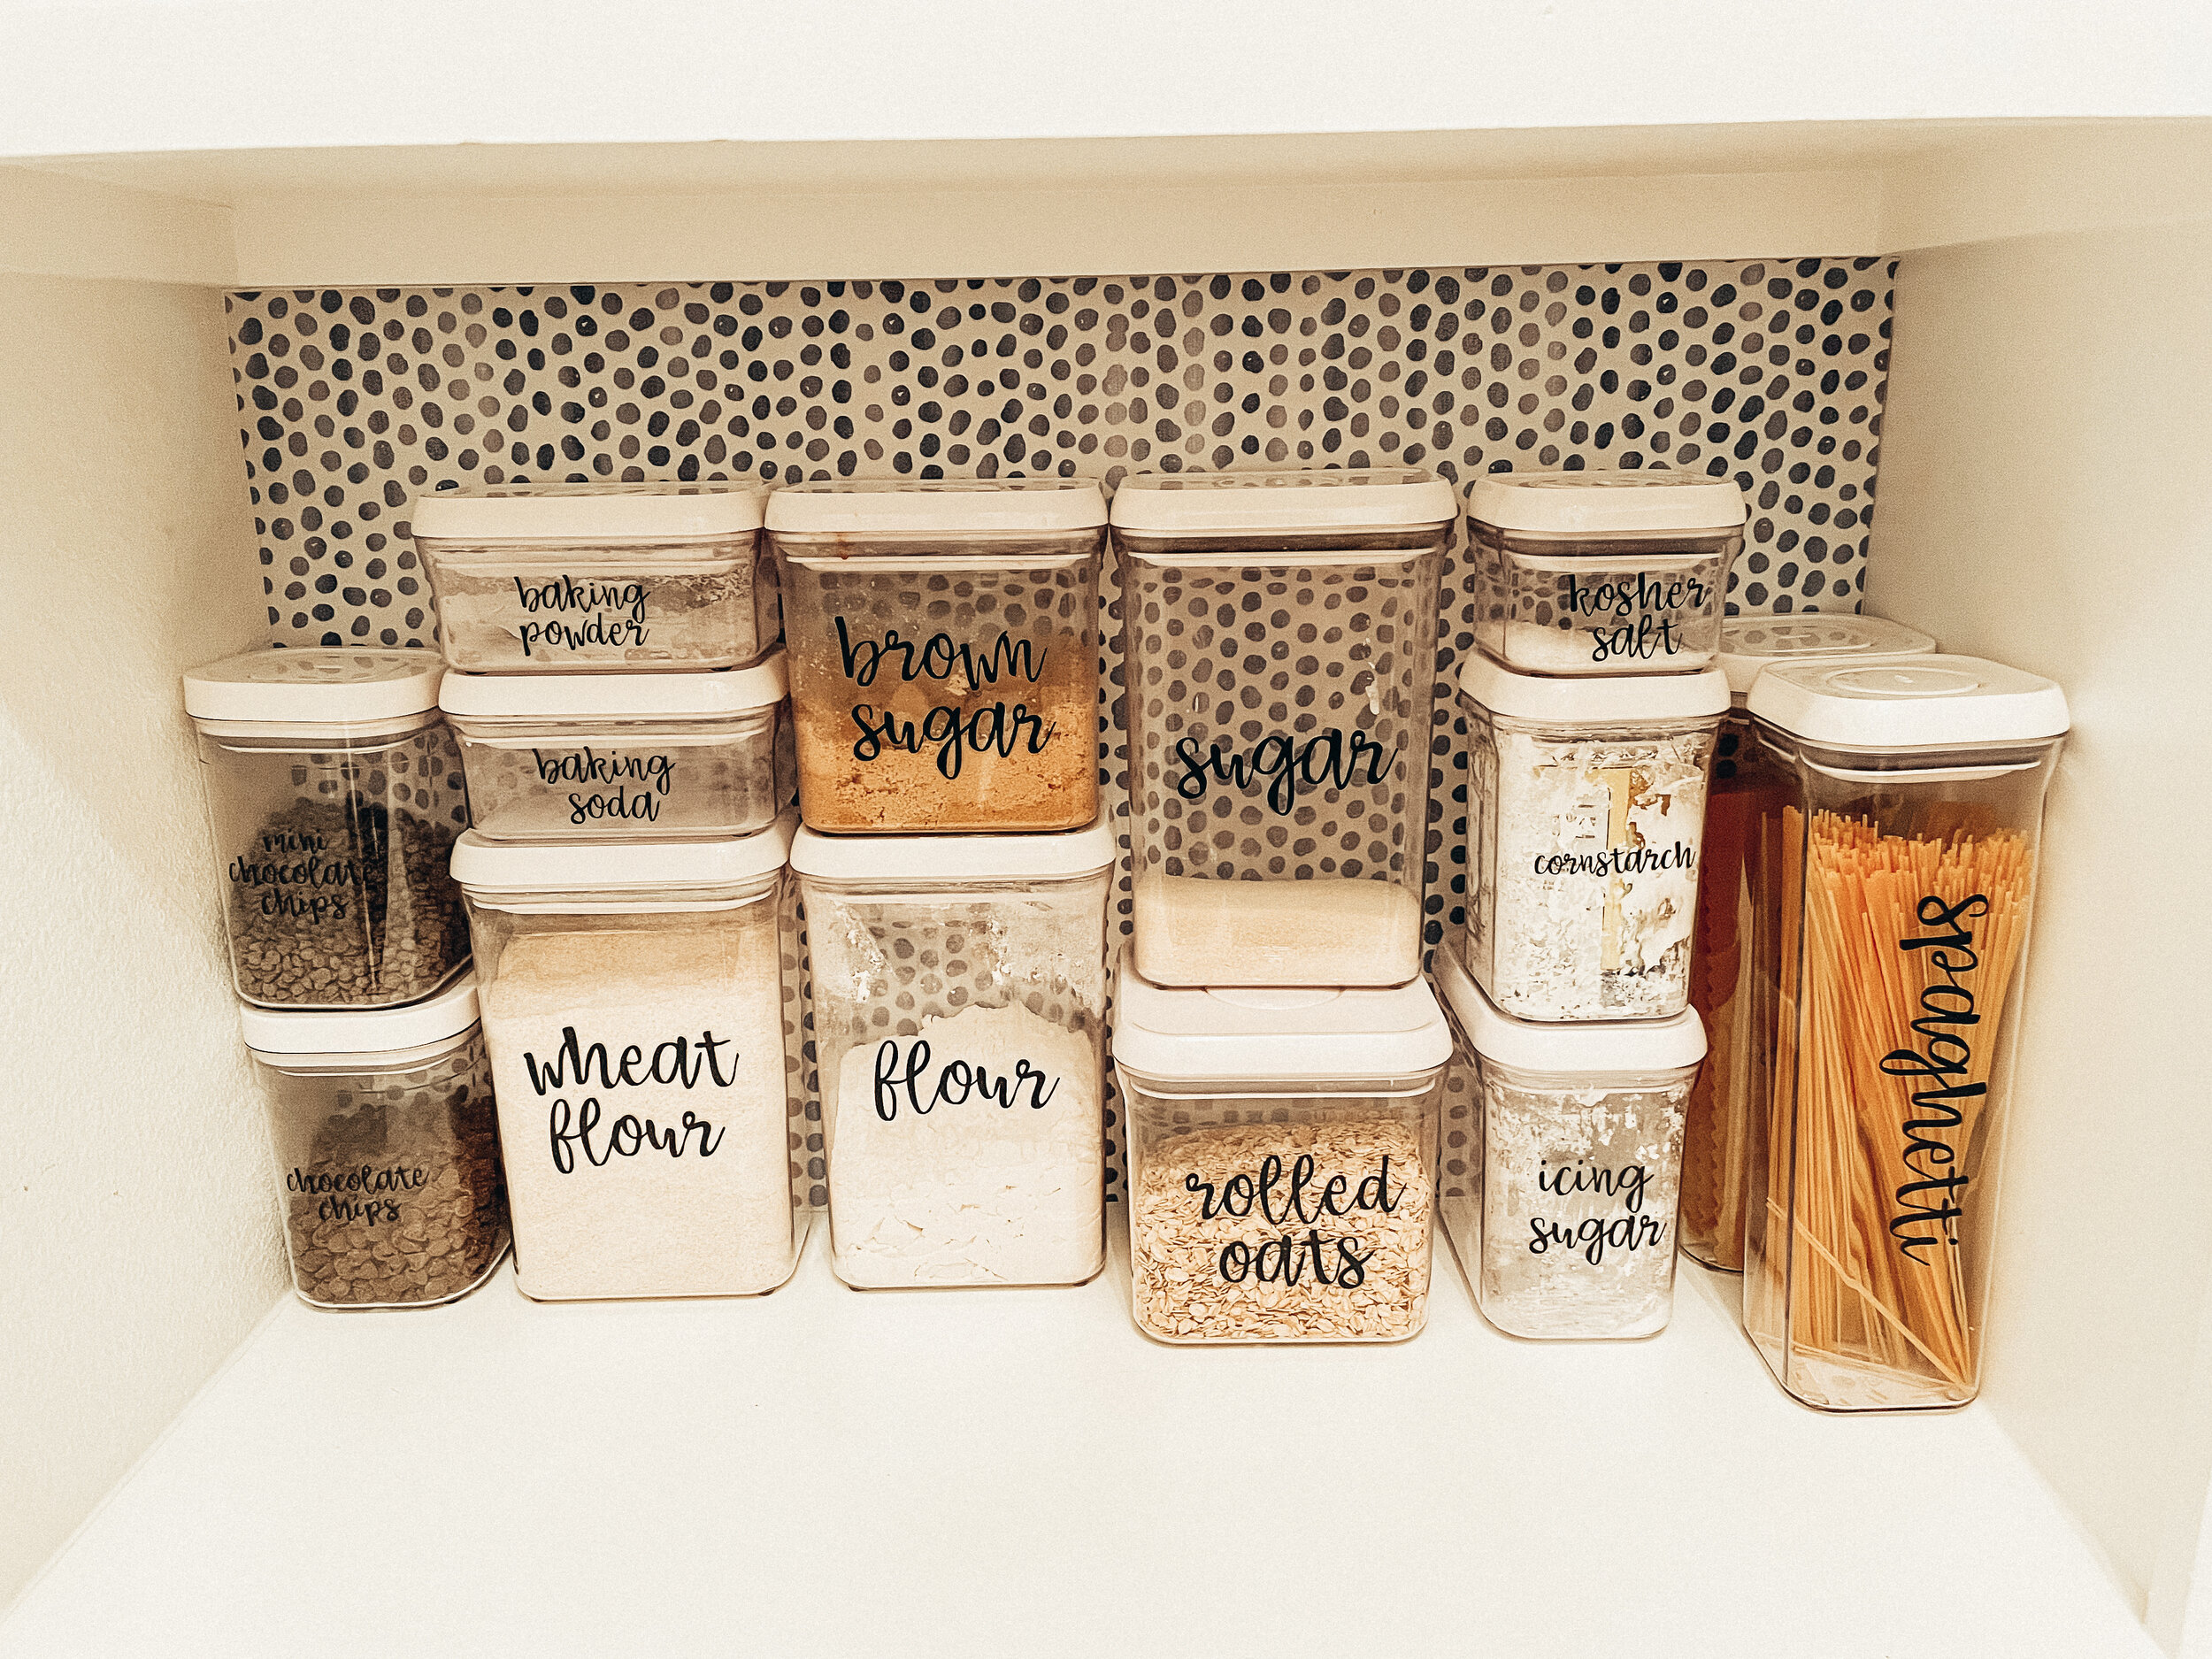 Organized pantry with baking supplies in clear containers